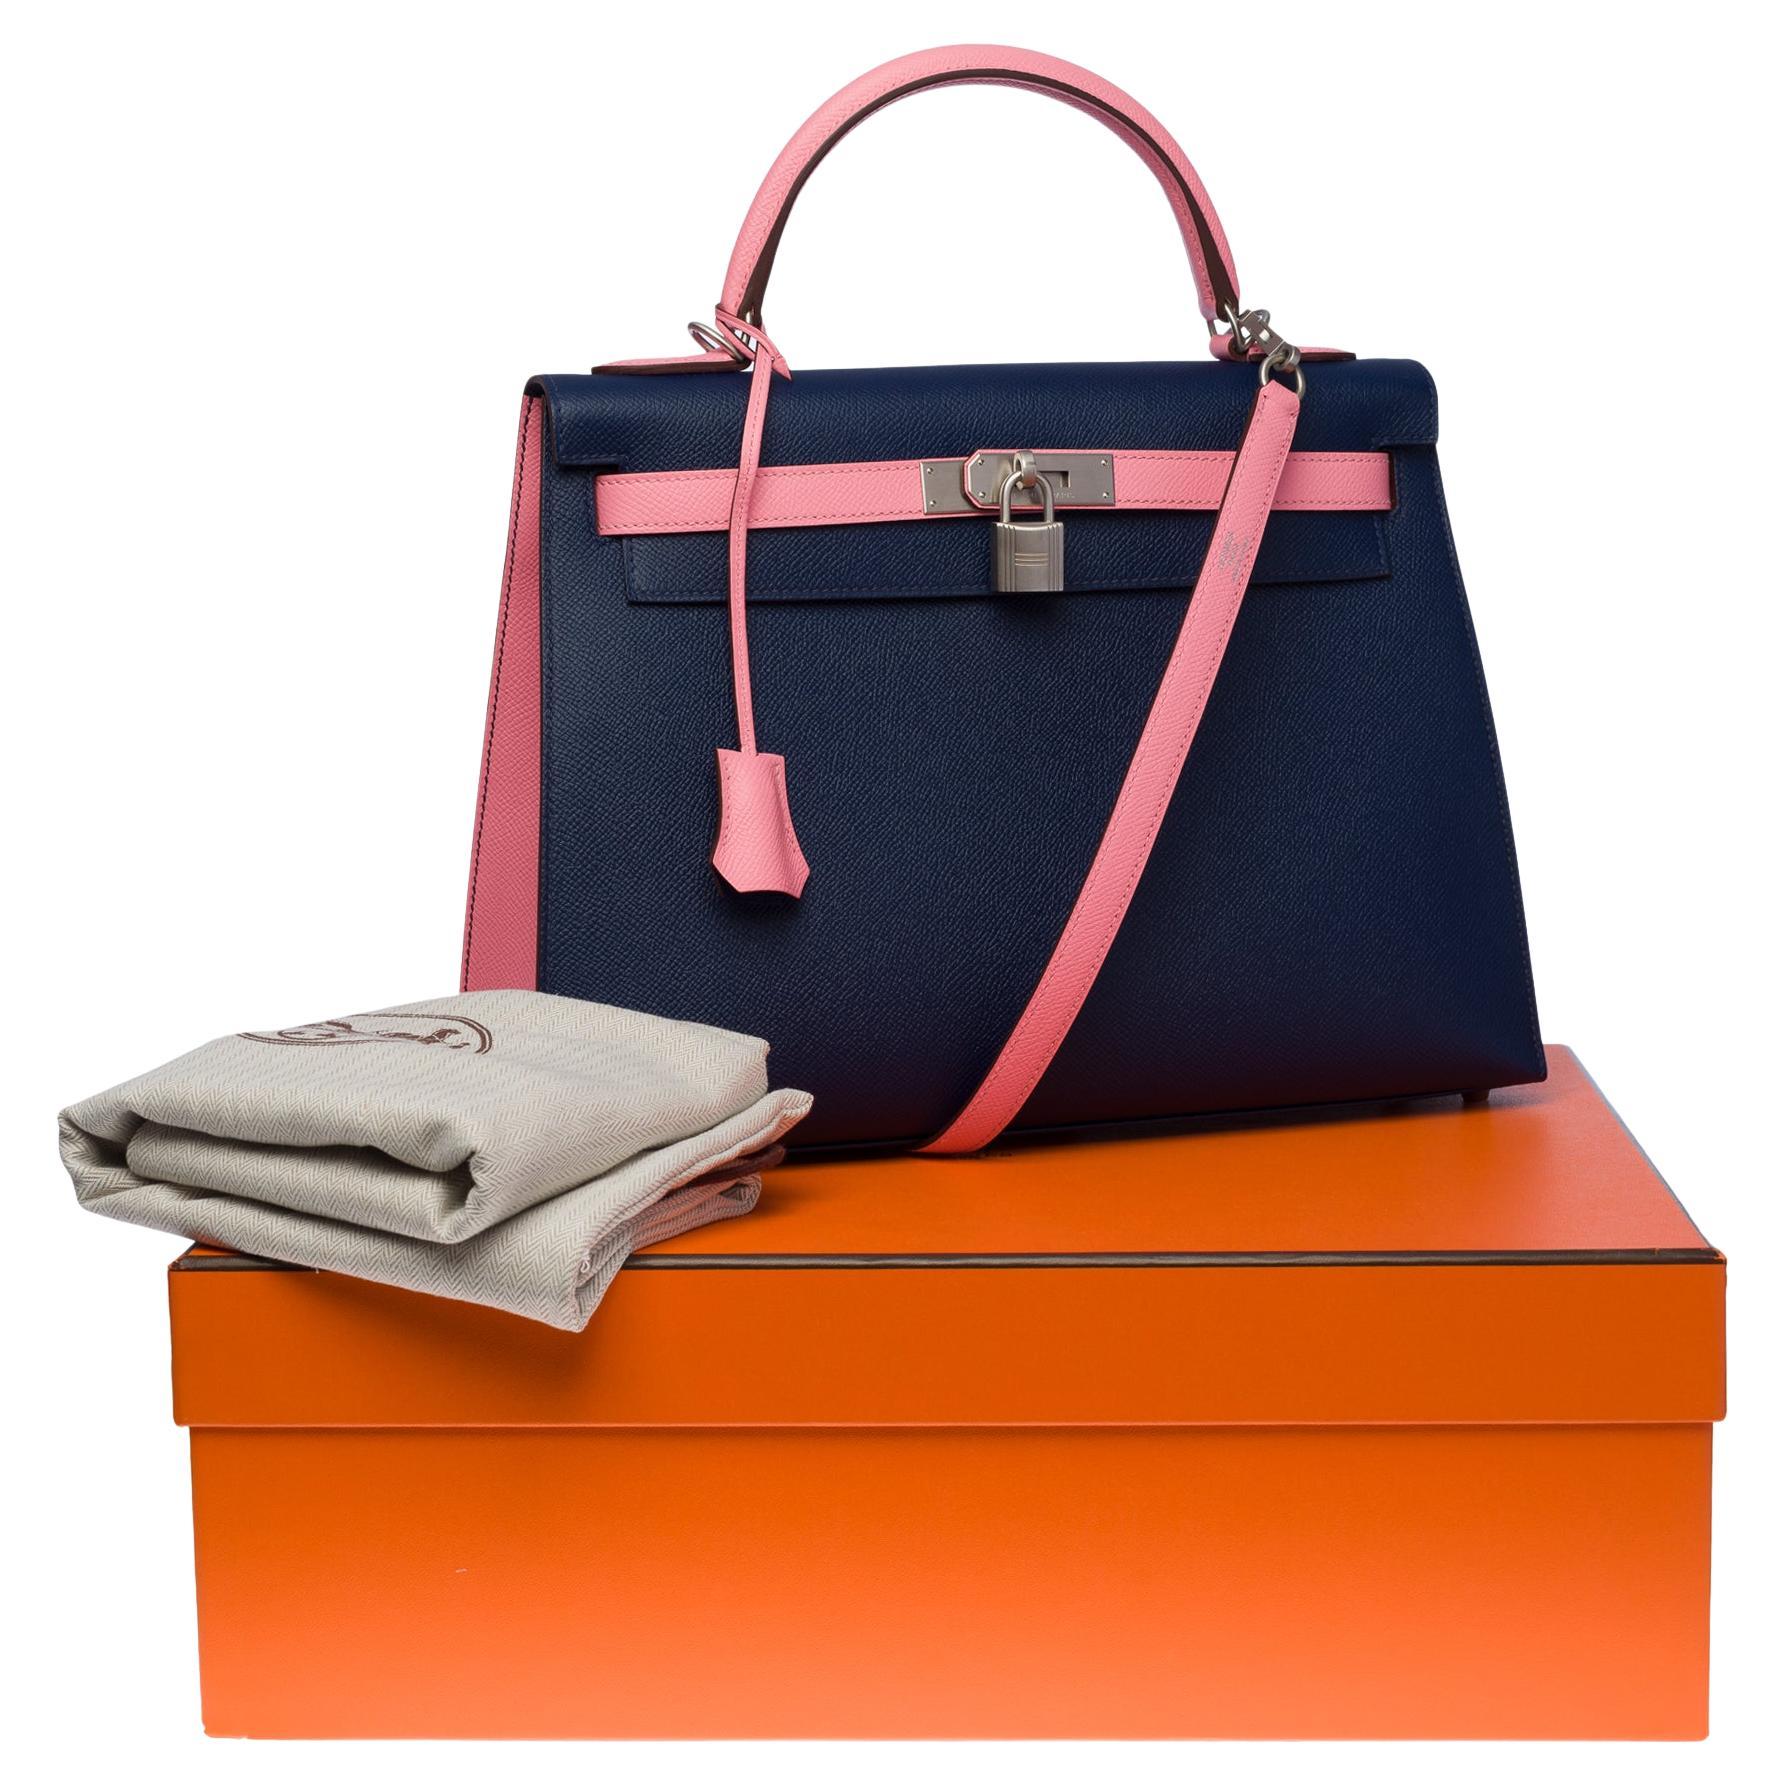 Hermès Kelly 32 sellier Special Order (HSS) in Pink and Blue Epsom leather, BSHW